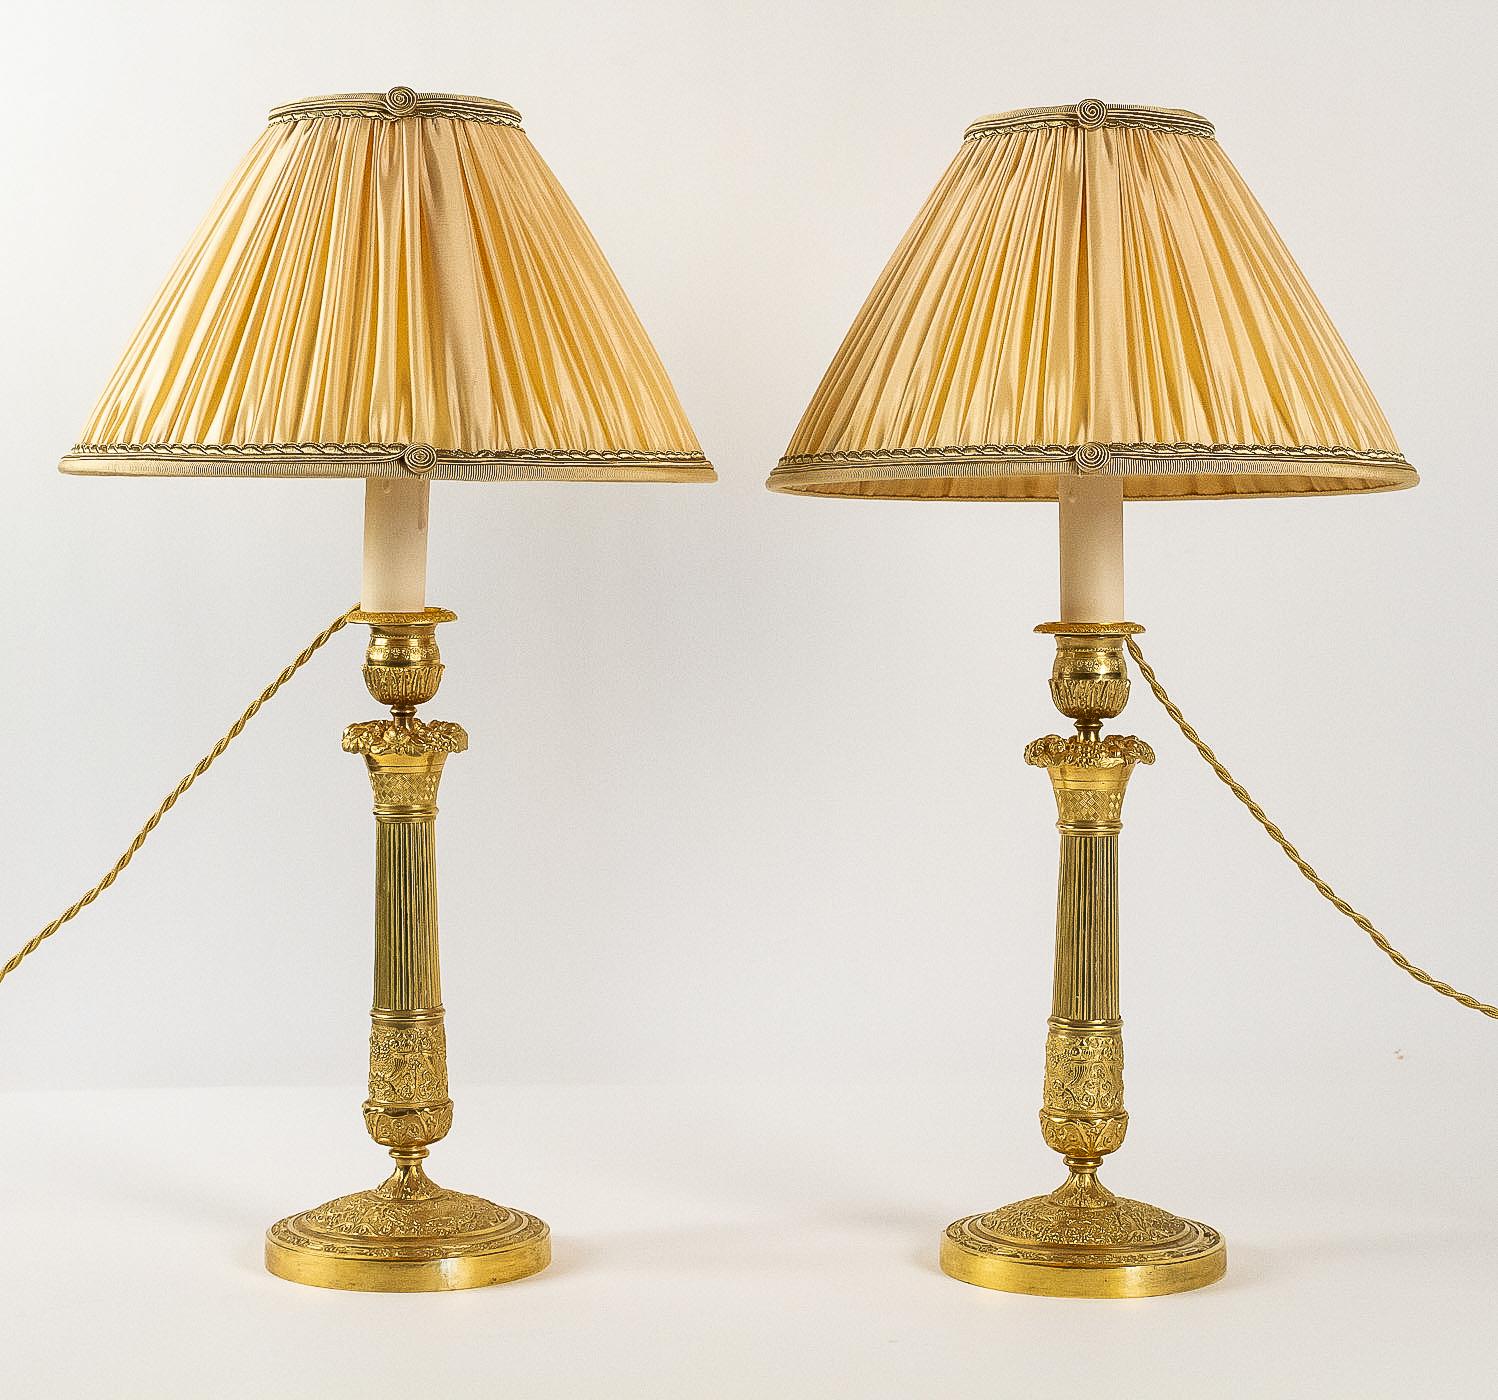 French Empire period, pair of chiseled ormolu candlesticks, converted in table lamps

An exciting and gorgeous pair of French Empire period gilt bronze candlesticks, finely chiseled of vineyard, flowers, palmettes and Horn of plenty.
Our